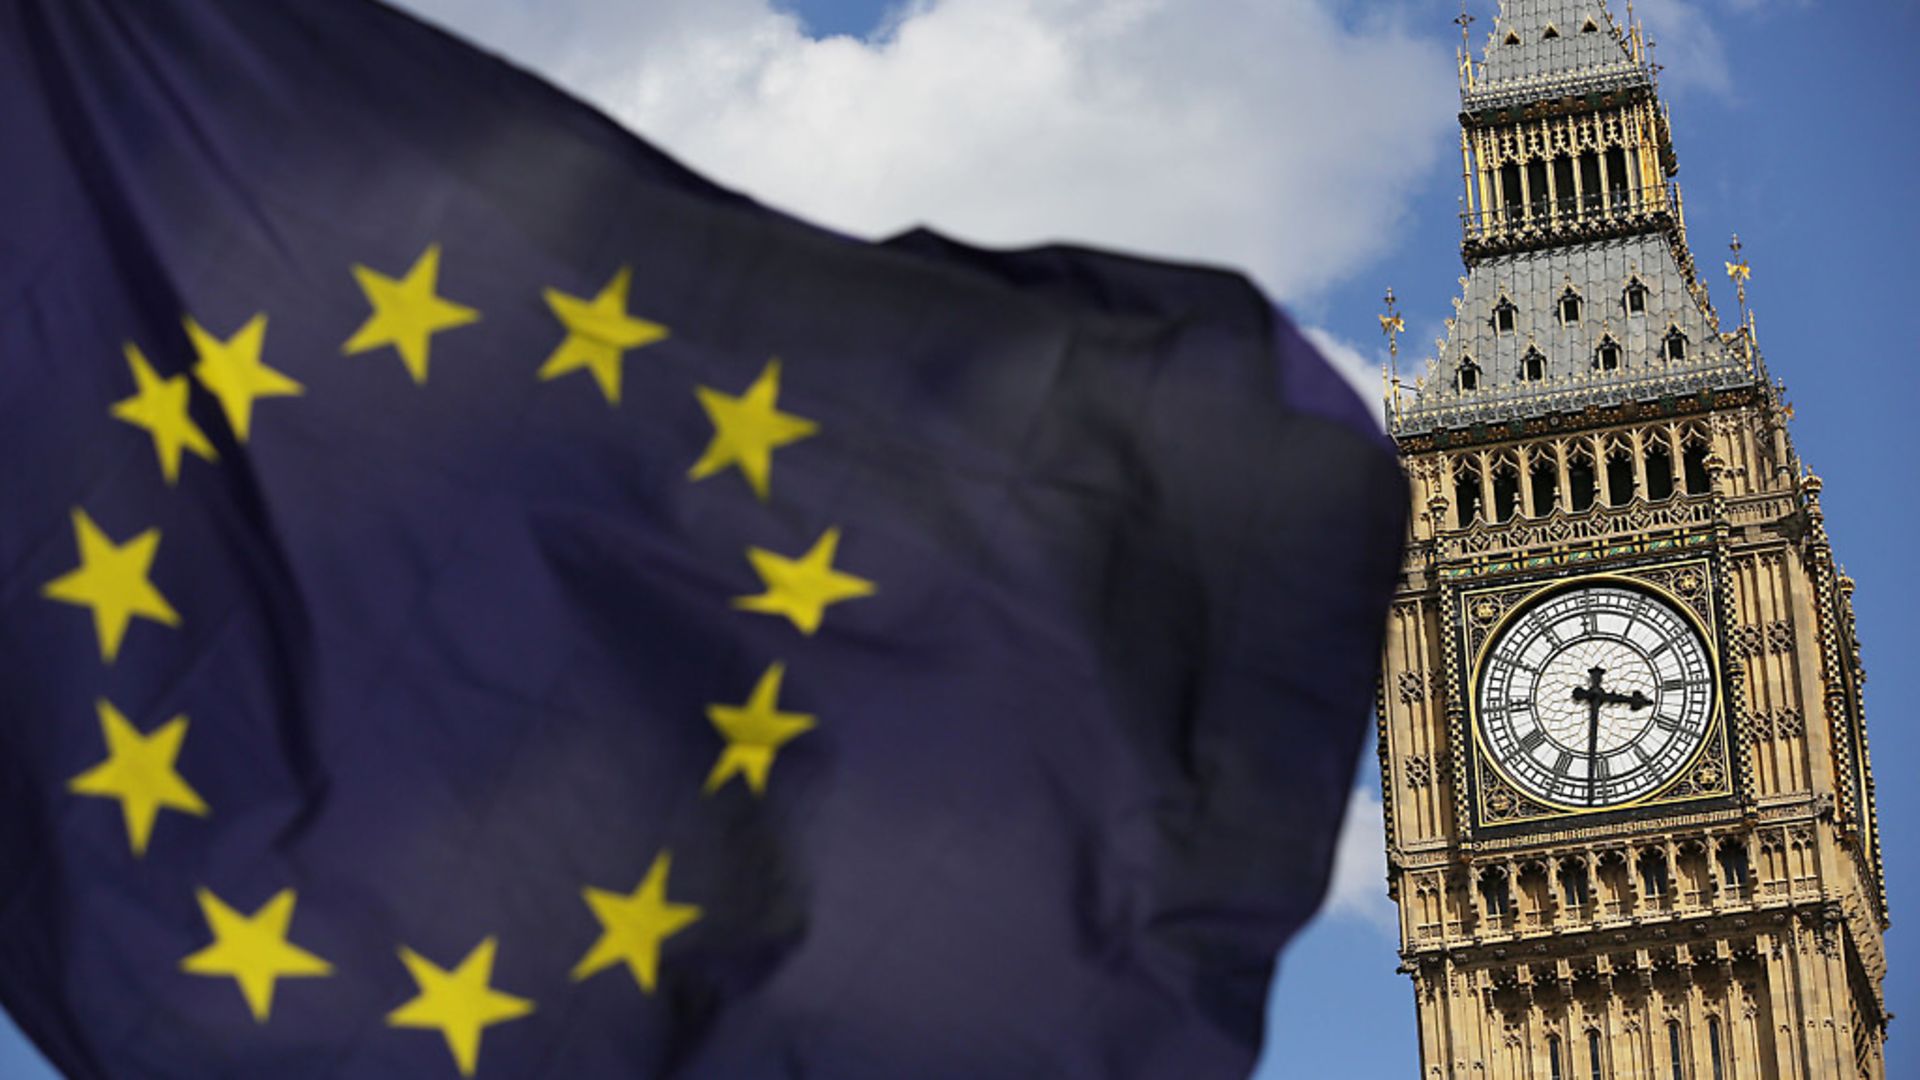 EU flag outside Westminster. Photograph: Daniel Leal-Olivas/PA - Credit: PA Wire/PA Images